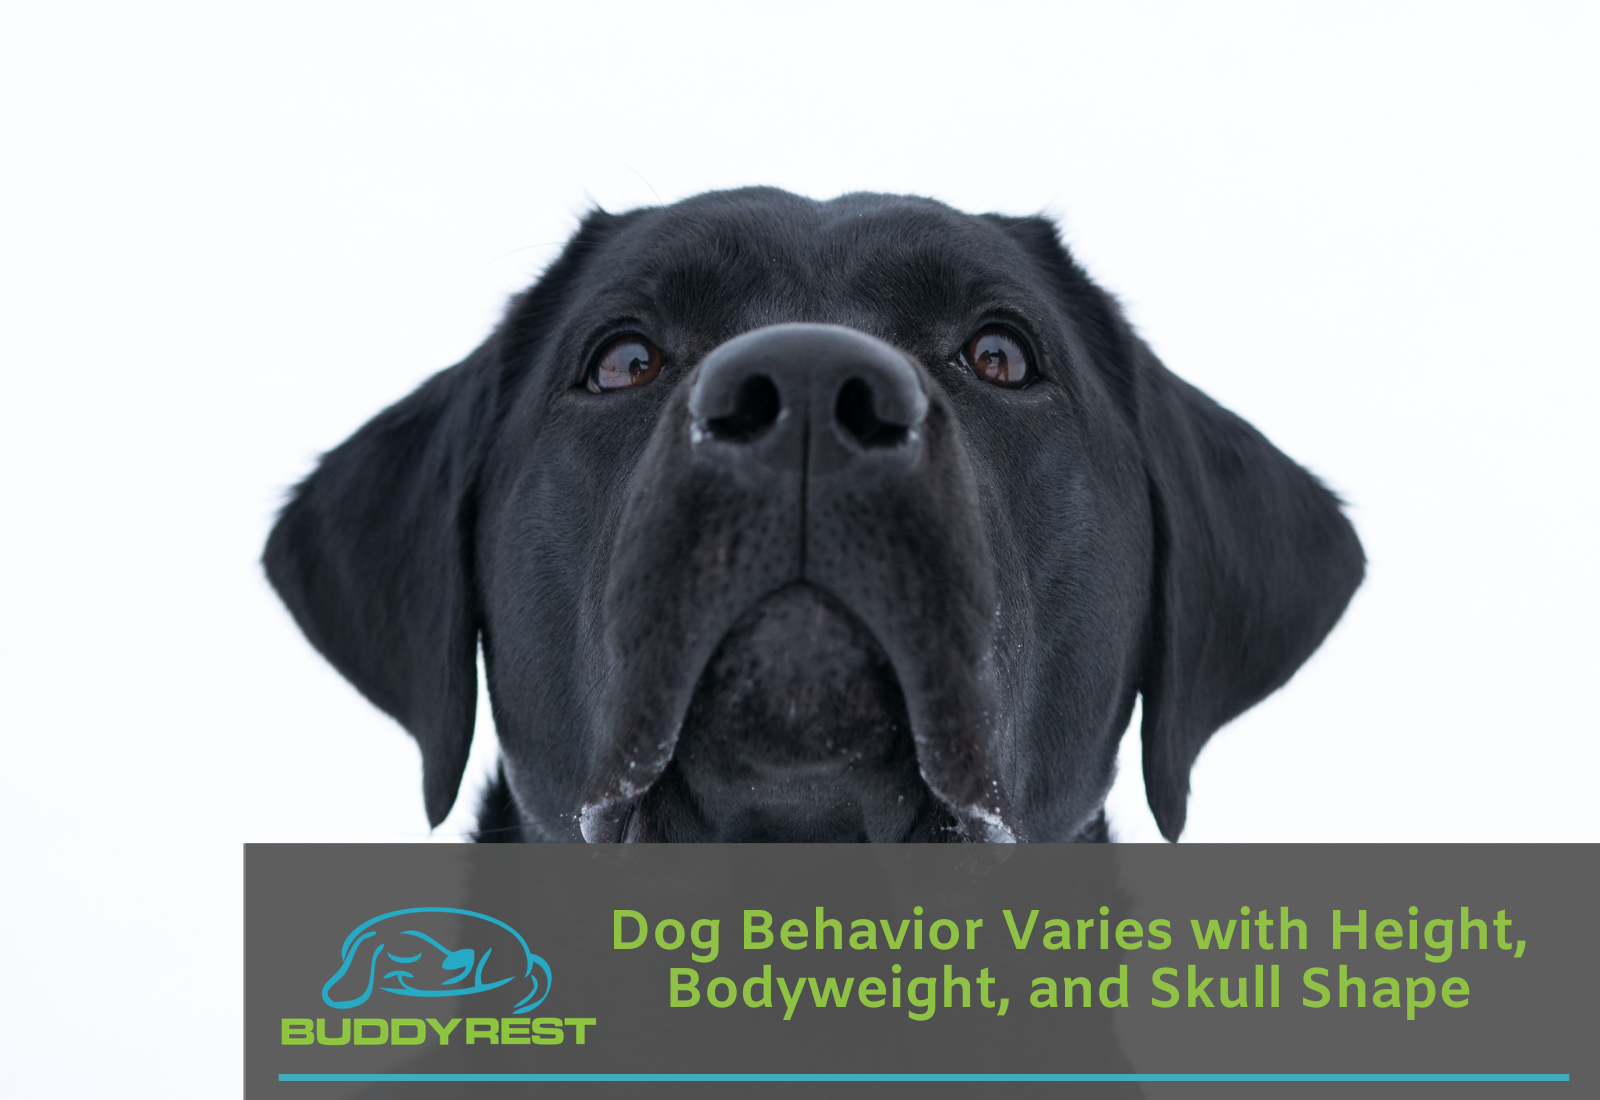 Dog Behavior Varies with Height, Bodyweight, and Skull Shape